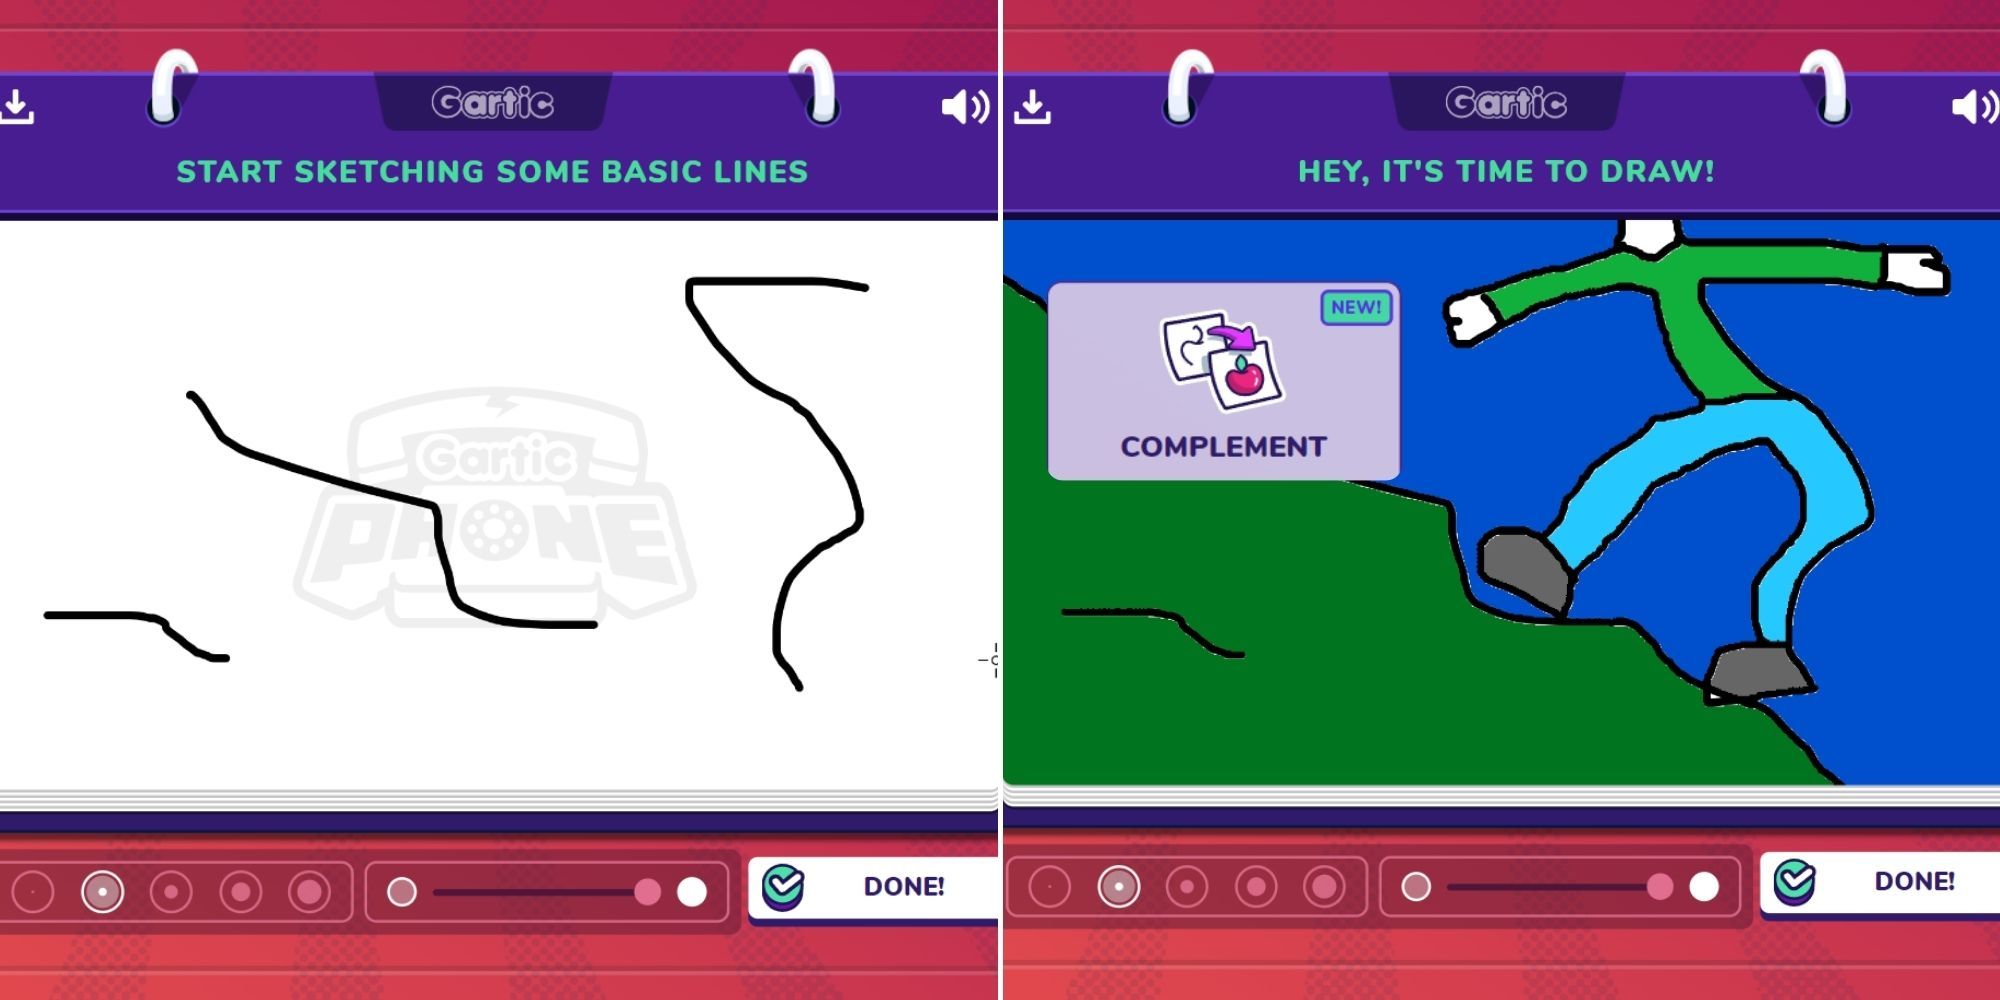 Gartic Phone - Complement Gamemode - Drawing lines followed by another player filling in the gaps